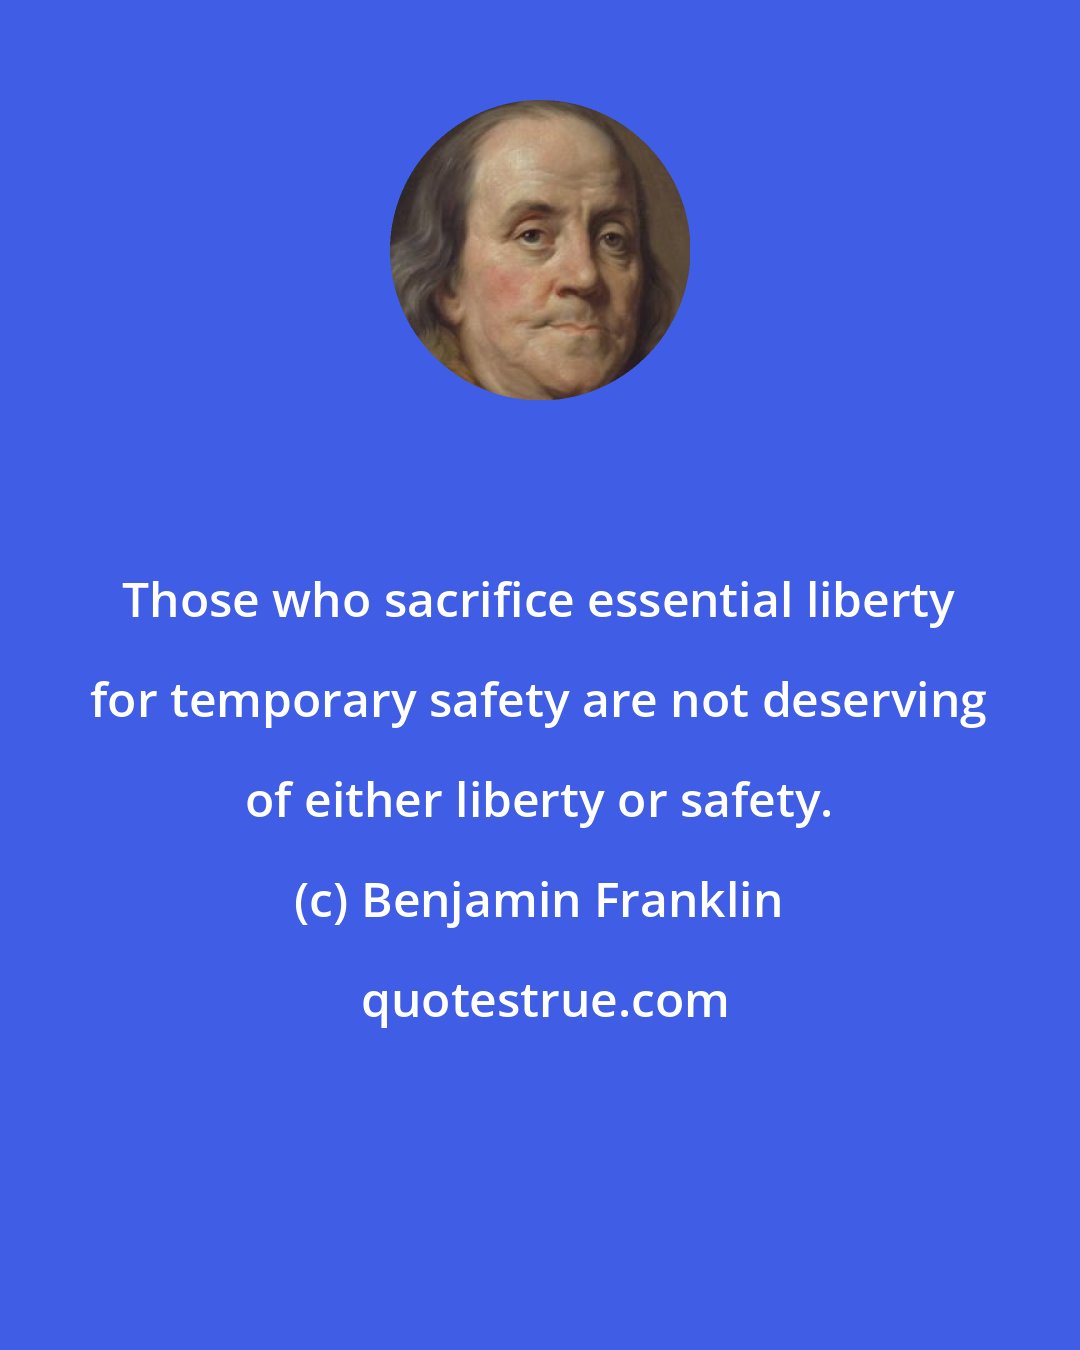 Benjamin Franklin: Those who sacrifice essential liberty for temporary safety are not deserving of either liberty or safety.